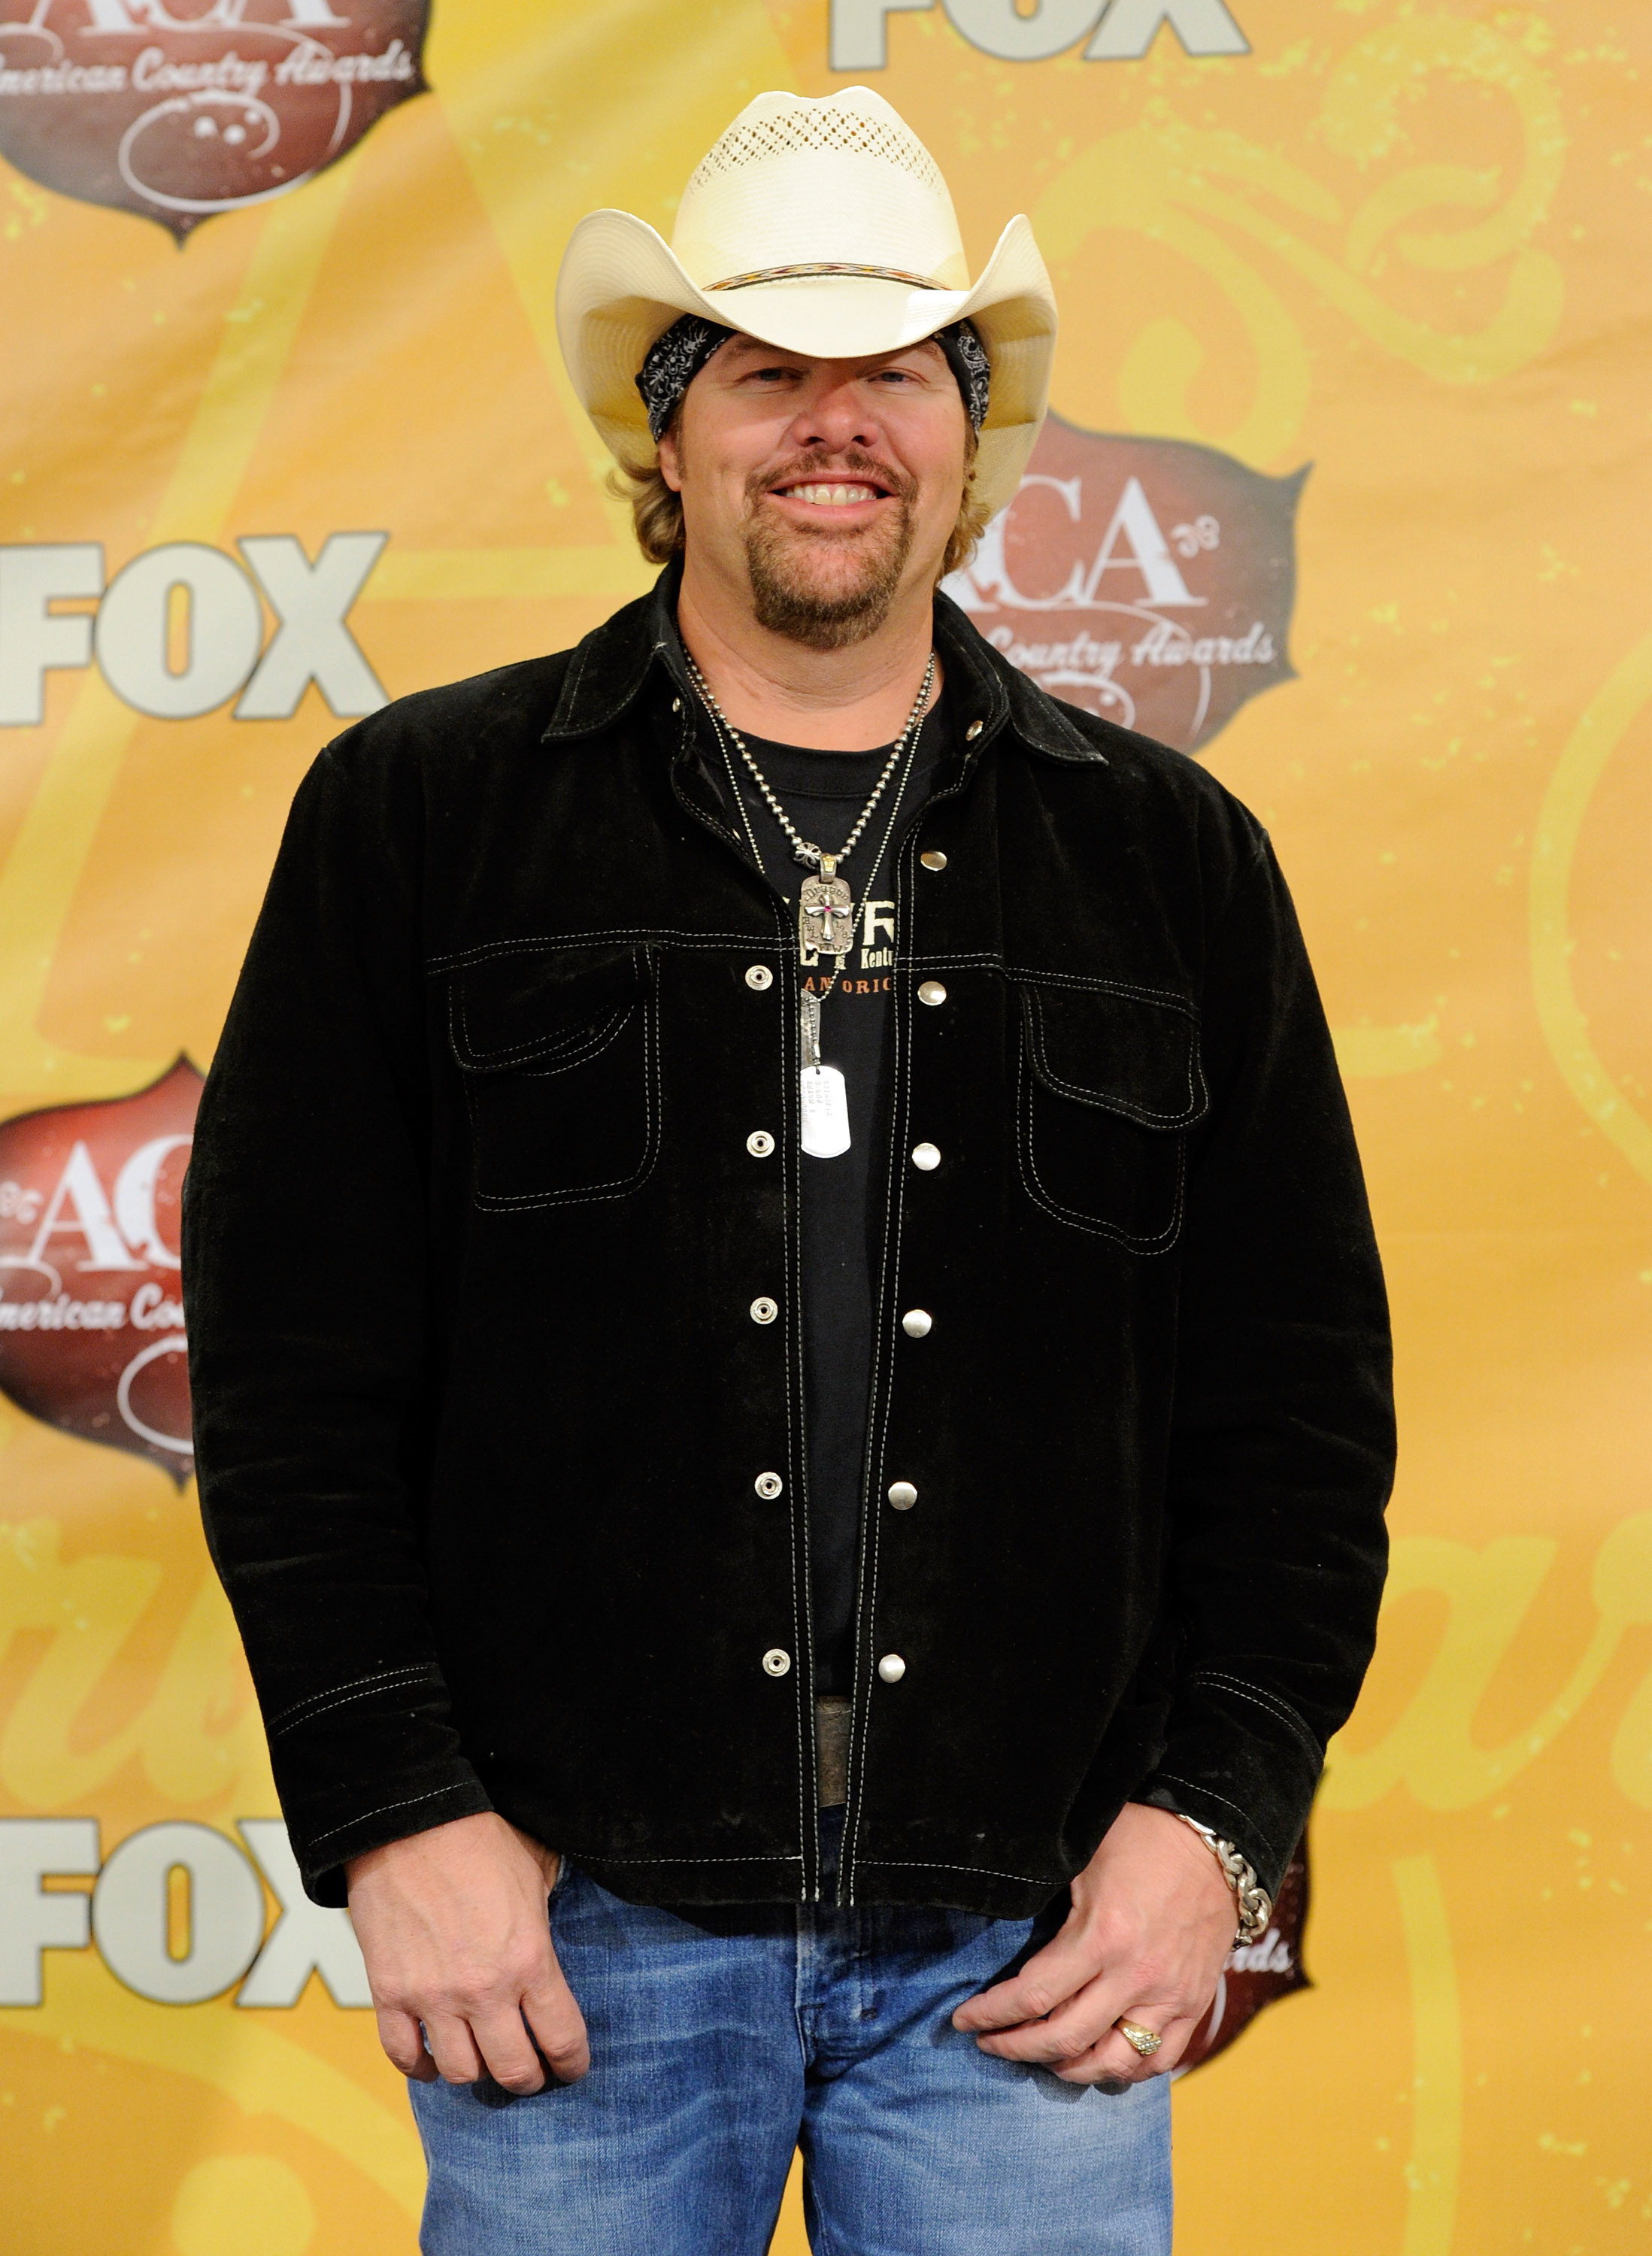 Toby Keith poses after winning the Video Visionary Award at the American Country Awards 2010 on December 6, 2010 in Las Vegas, Nevada | Source: Getty Images